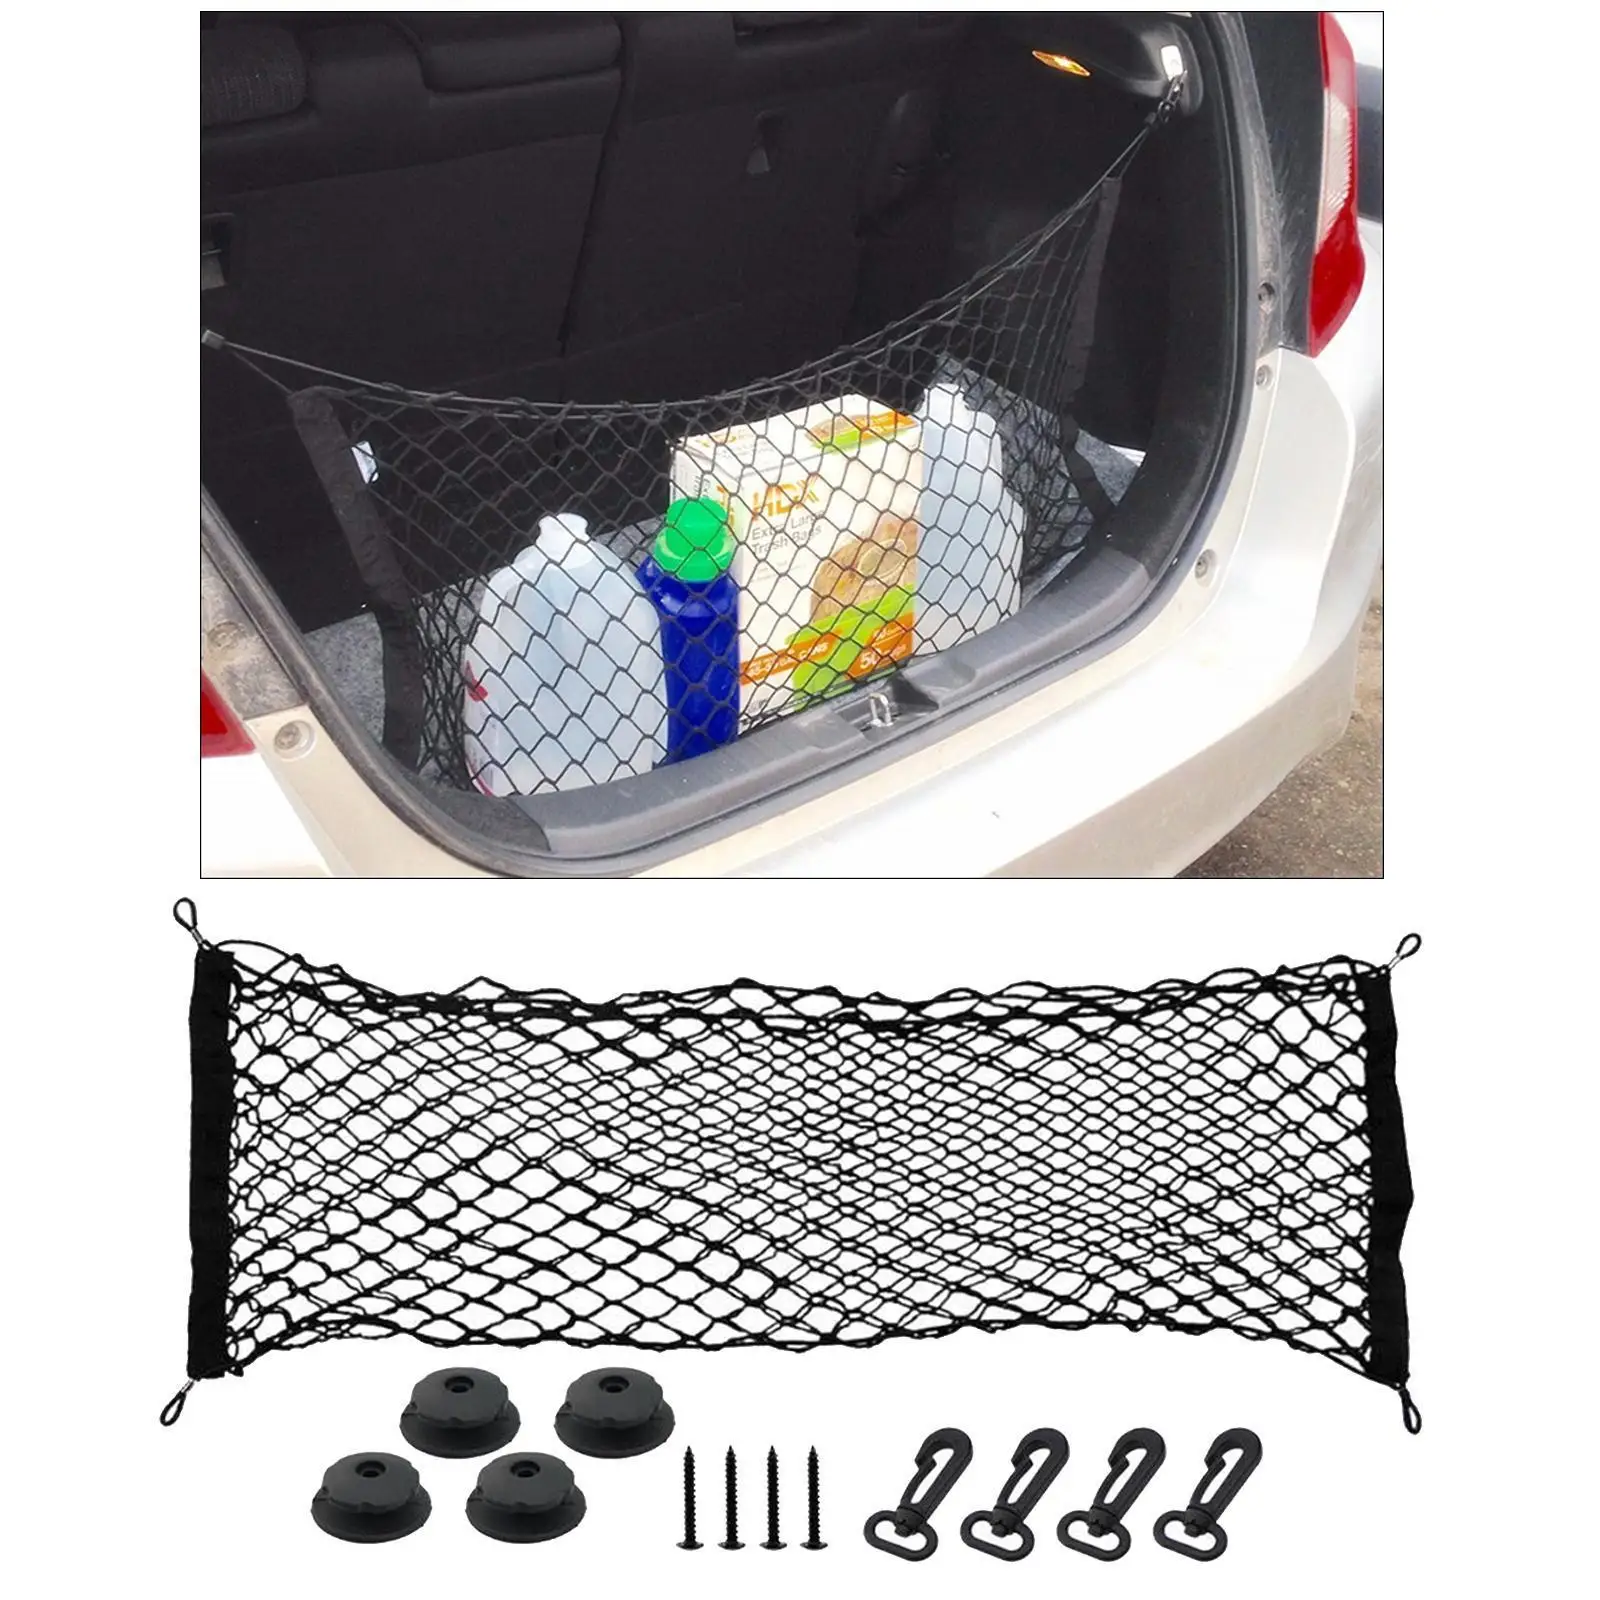 Universal Rear Trunk Mesh Stretchable Cargo Net Pocket Bag for SUV Truck